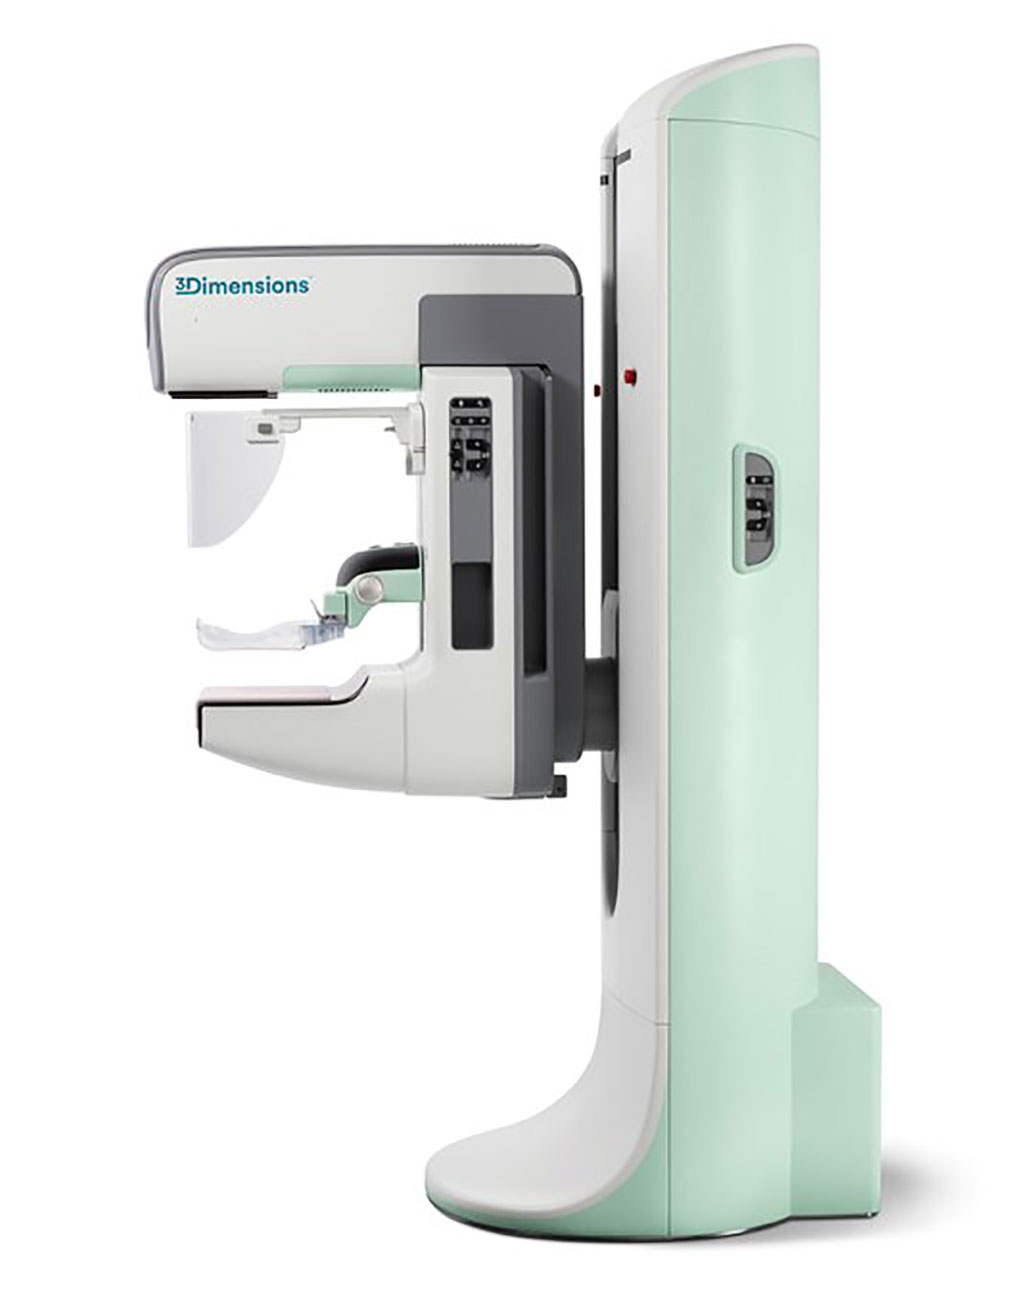 Image: The 3Dimensions mammography system is the first DBT system to receive EUREF Type Test Certification (Photo courtesy of Hologic)